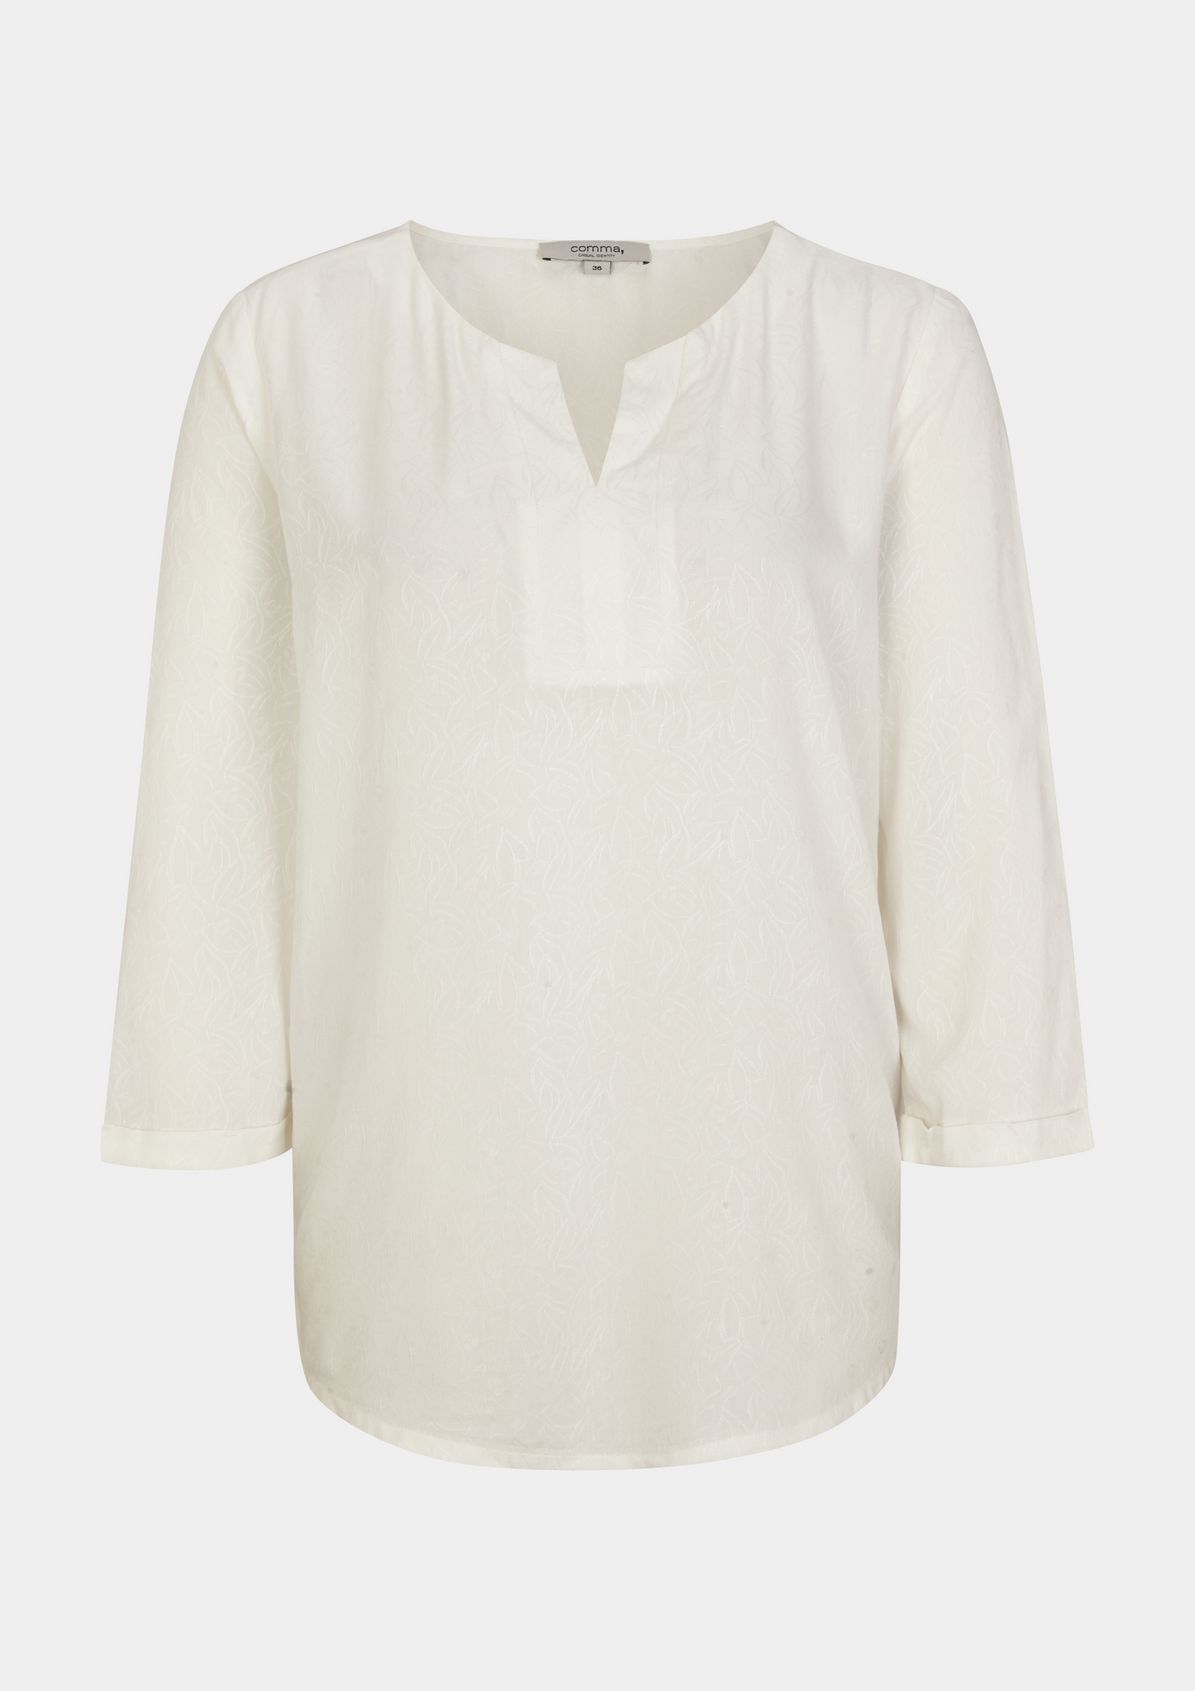 Viscose blouse with 3/4-length sleeves from comma